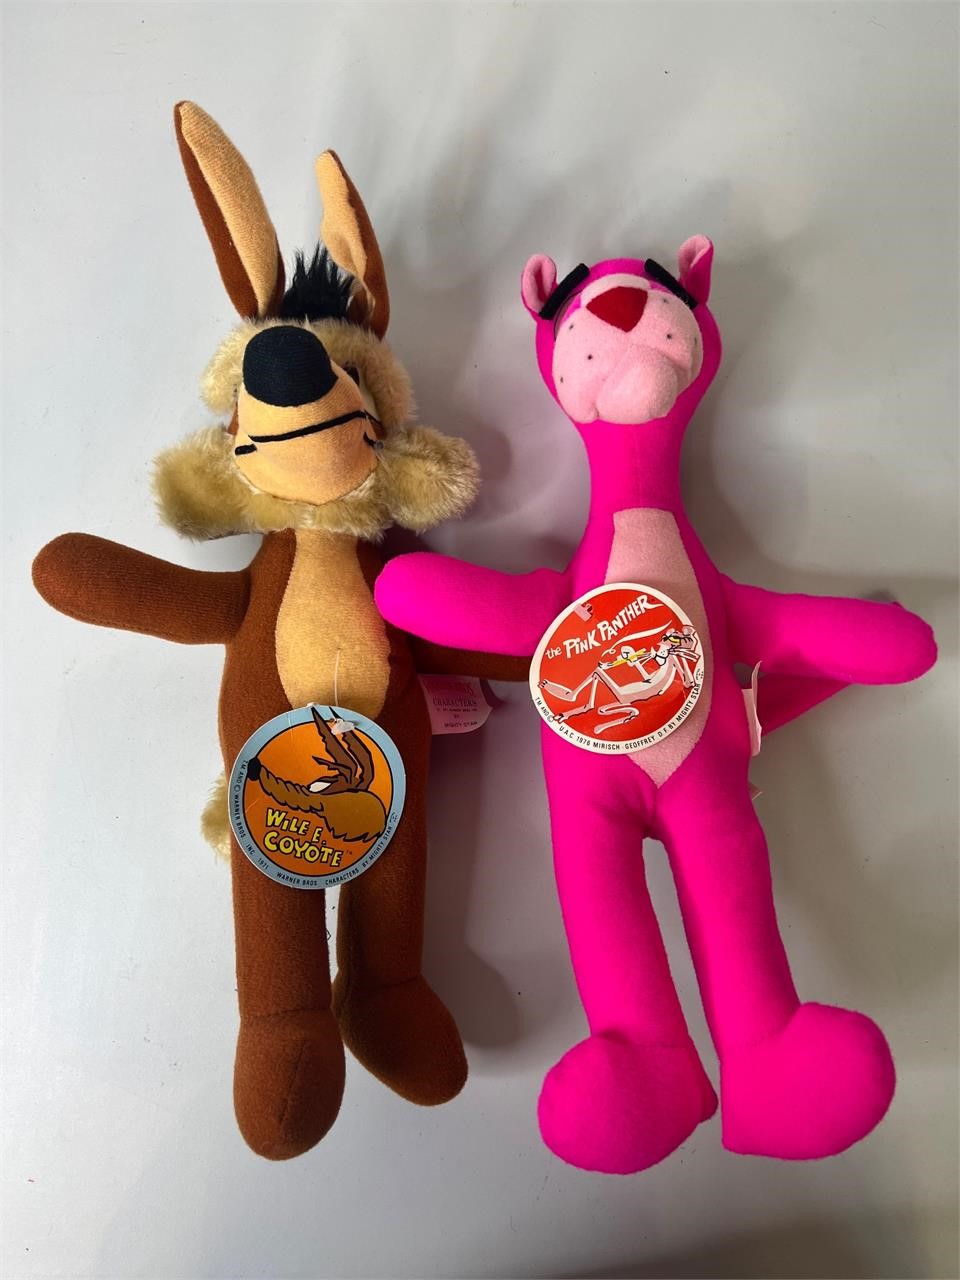 Wile E Coyote & Pink Panther By Mighty Star